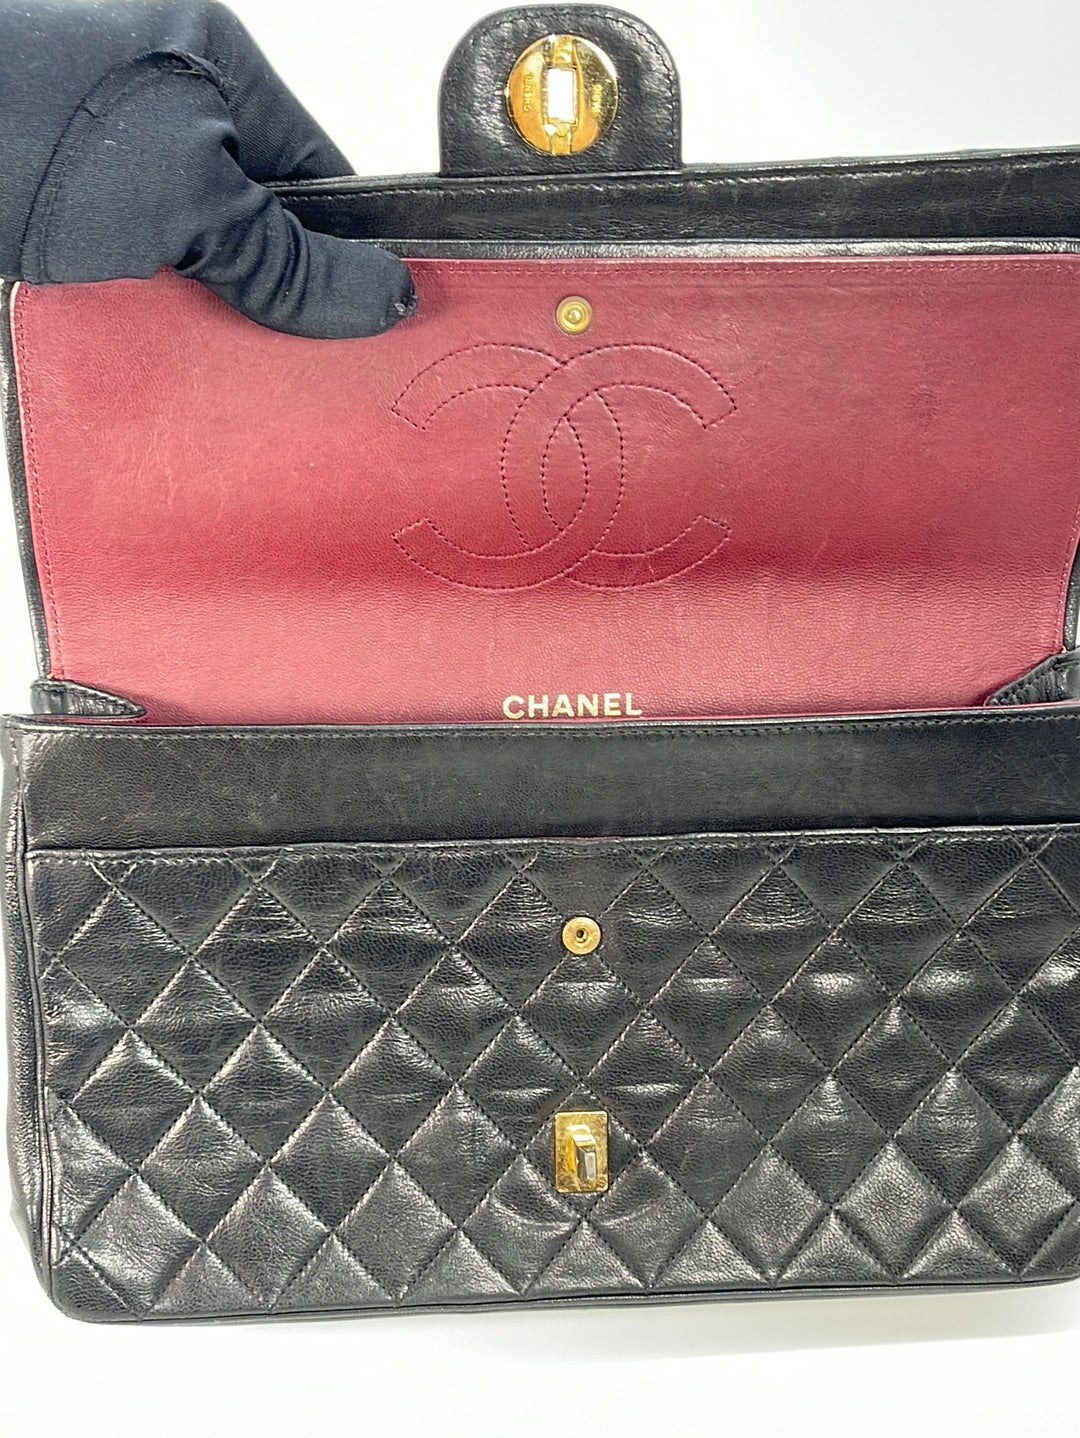 New and Gently Used Chanel Bags, Accessories & Clothing – VSP Consignment